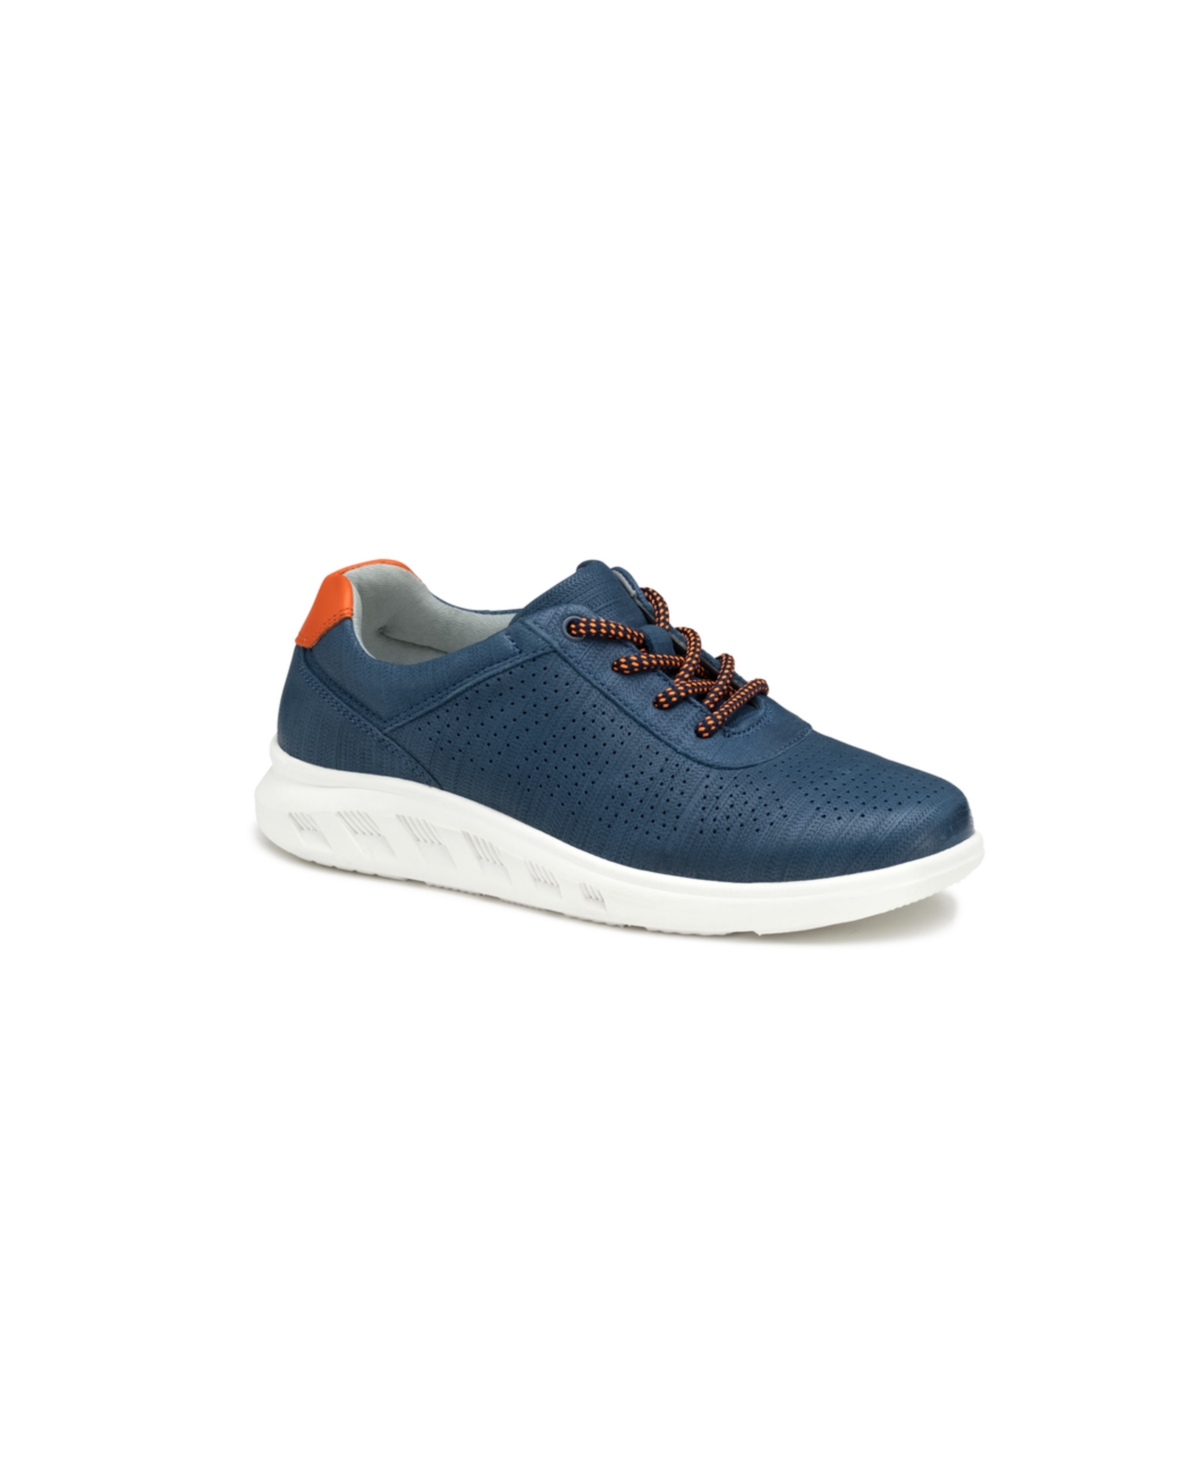 Johnston & Murphy Big Boys Activate U-throat Lace-up Sneakers In Navy Full Grain